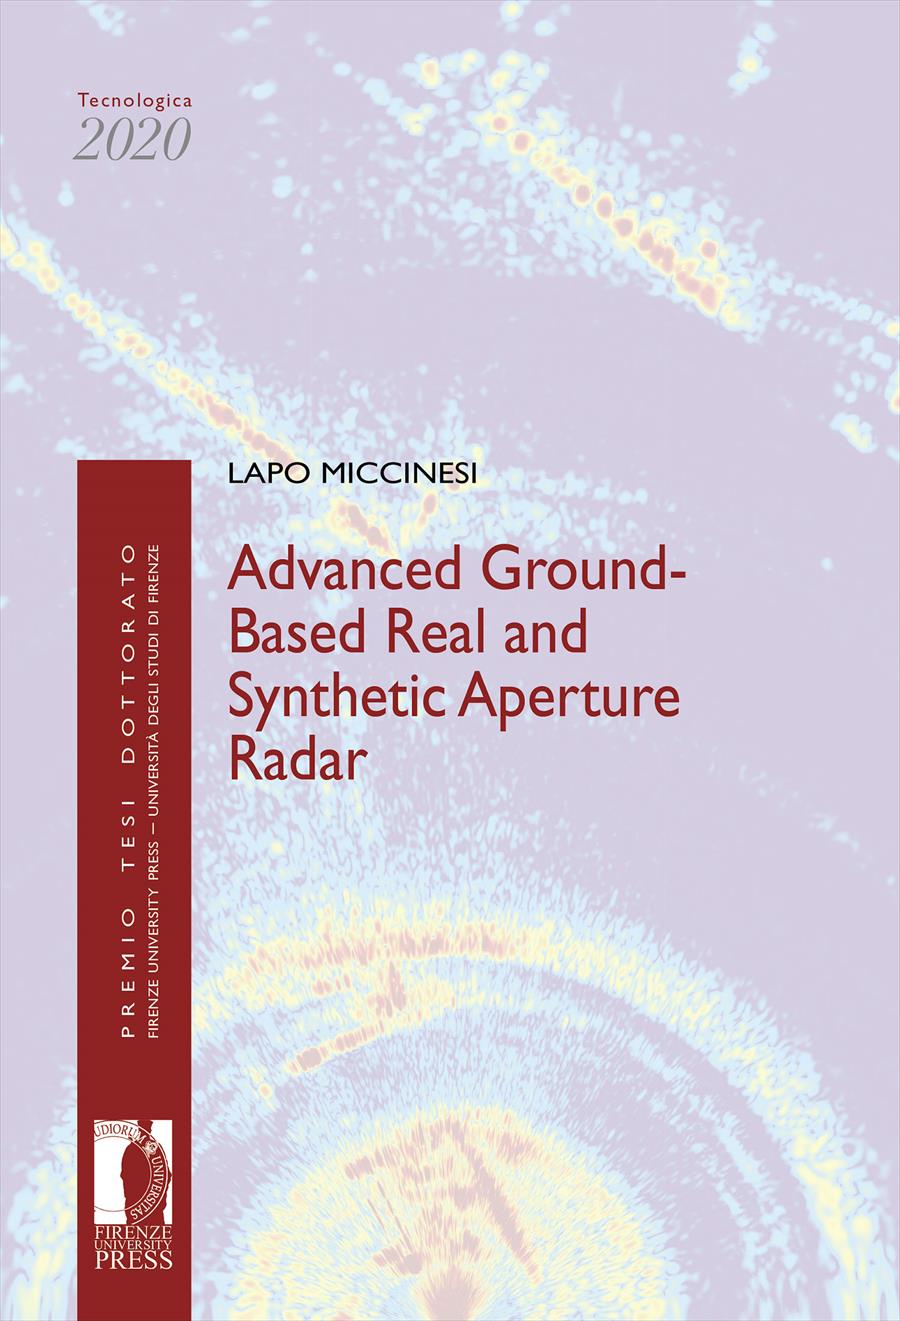 Advanced Ground-Based Real and Synthetic Aperture Radar